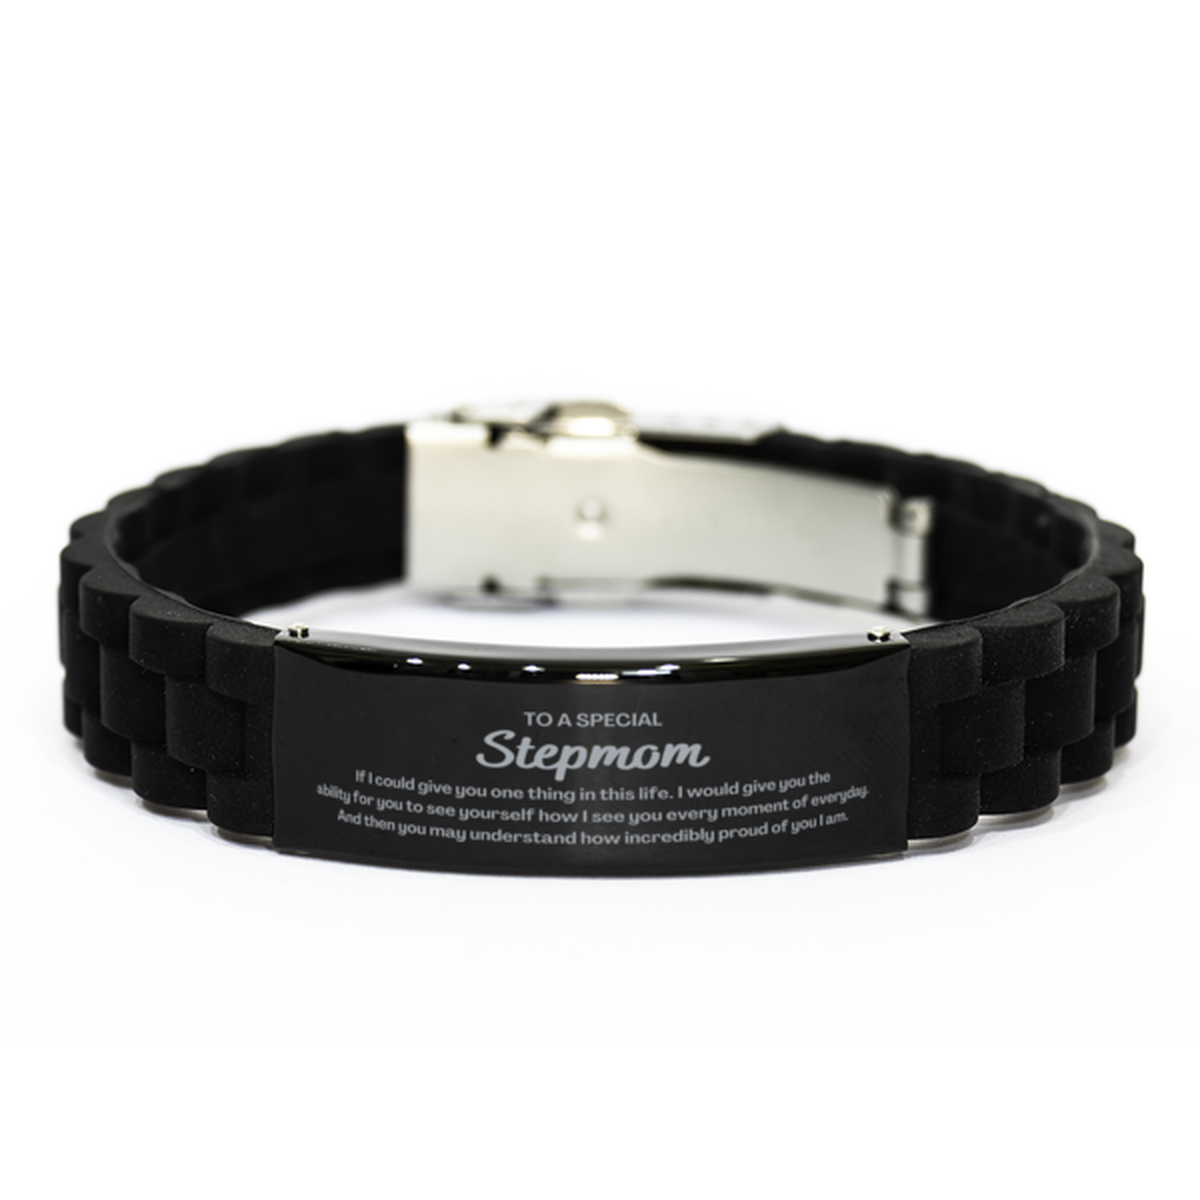 To My Stepmom Black Glidelock Clasp Bracelet, Gifts For Stepmom Engraved, Inspirational Gifts for Christmas Birthday, Epic Gifts for Stepmom To A Special Stepmom how incredibly proud of you I am